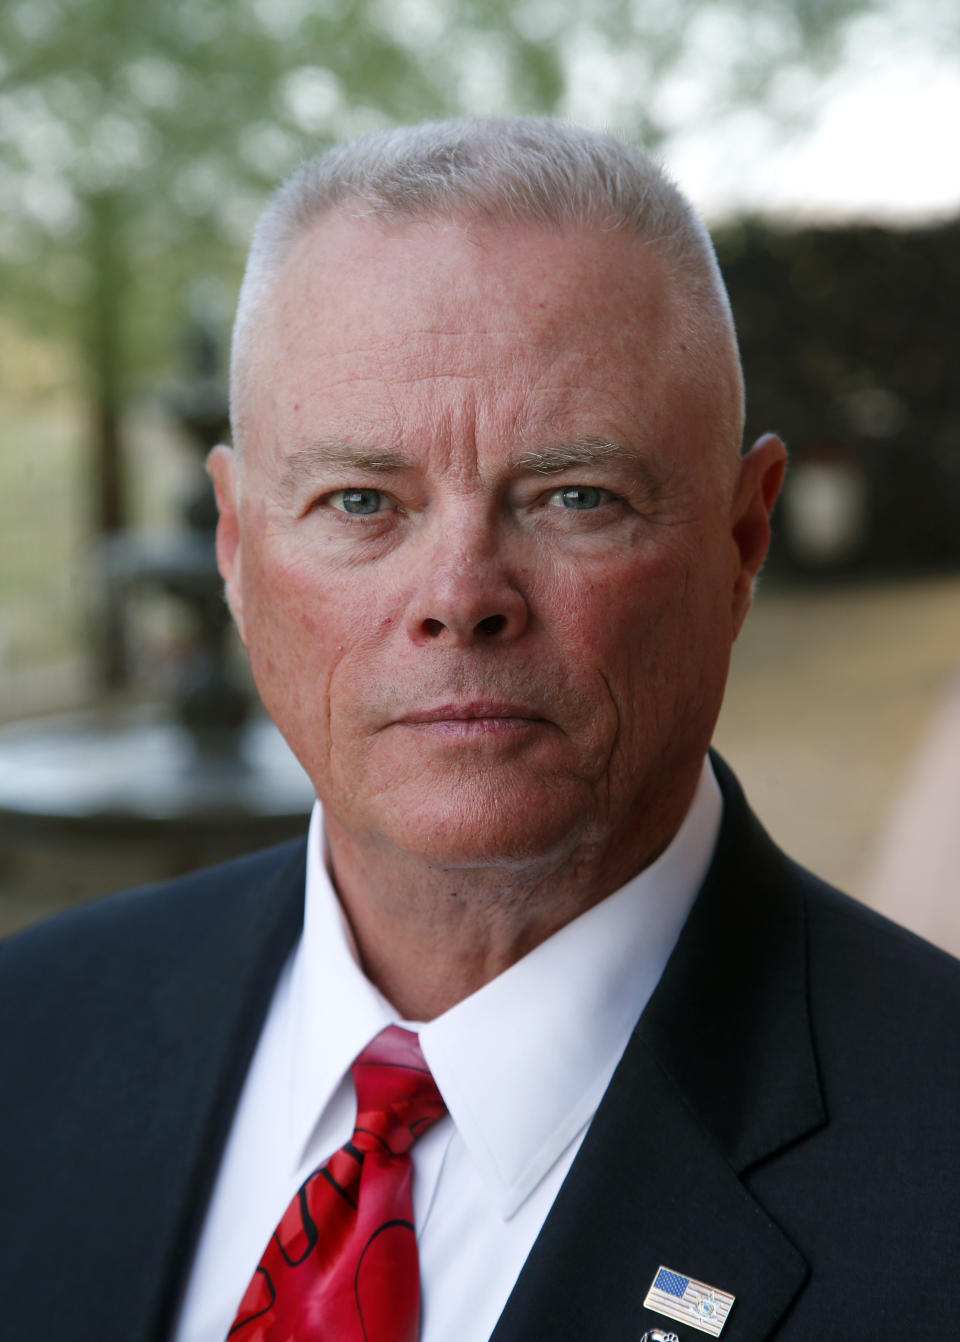 Jerry Sheridan is running for the position of Maricopa County Sheriff in the Republican primary, Wednesday, July 22, 2020, in Fountain Hills, Ariz. Former Maricopa County Sheriff Joe Arpaio is trying to win back the sheriff’s post in metro Phoenix that he held for 24 years, facing his former second-in-command, Sheridan, in the Aug. 4 Republican primary in what has become his second comeback bid. (AP Photo/Ross D. Franklin)